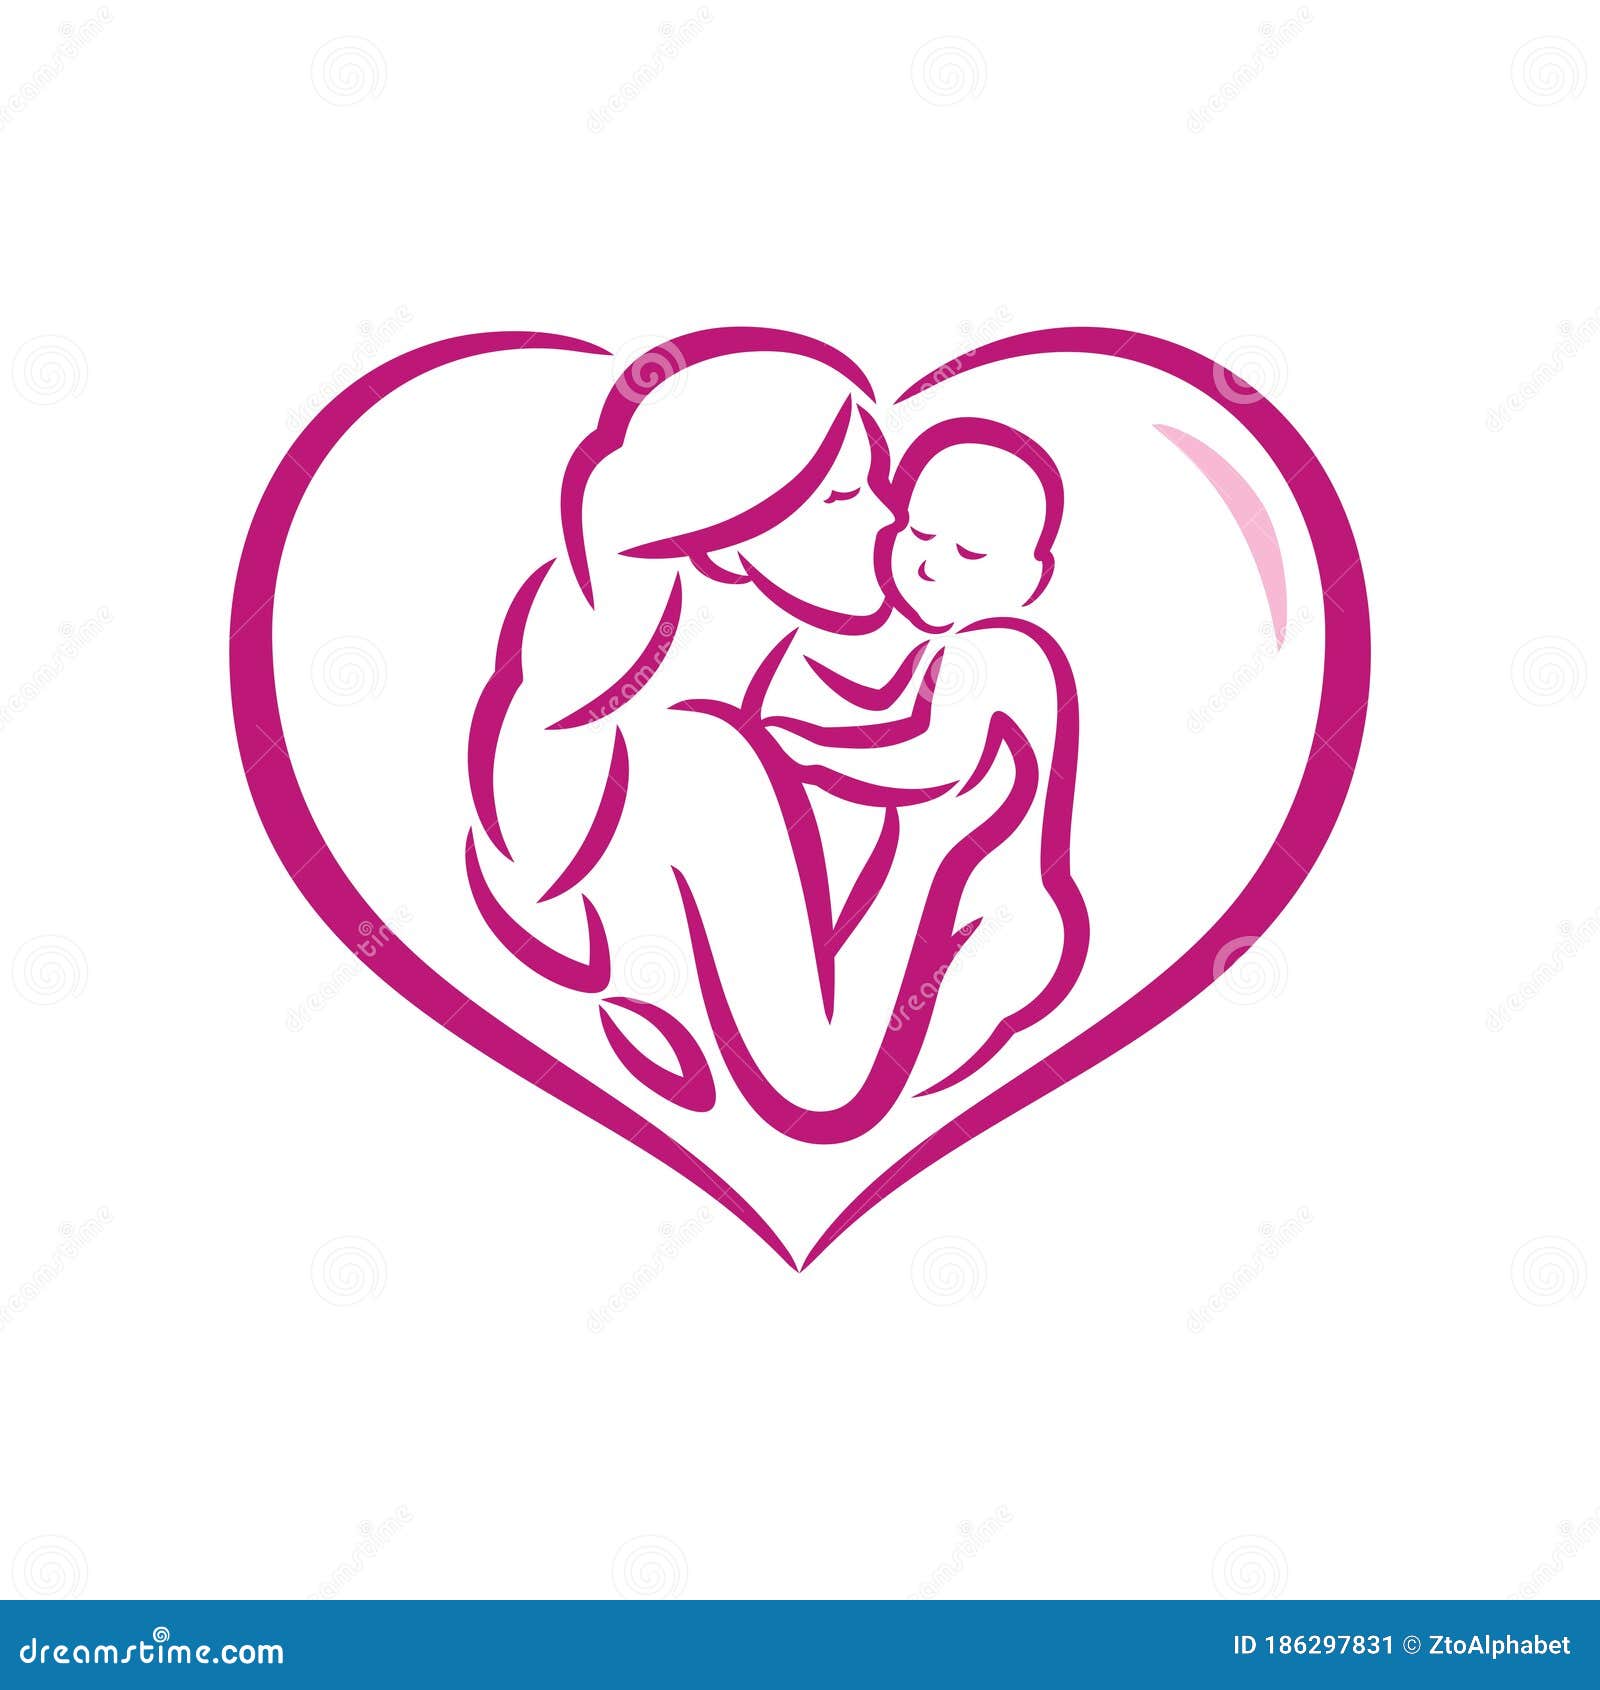 Mom and children care icon stock vector. Illustration of happiness ...